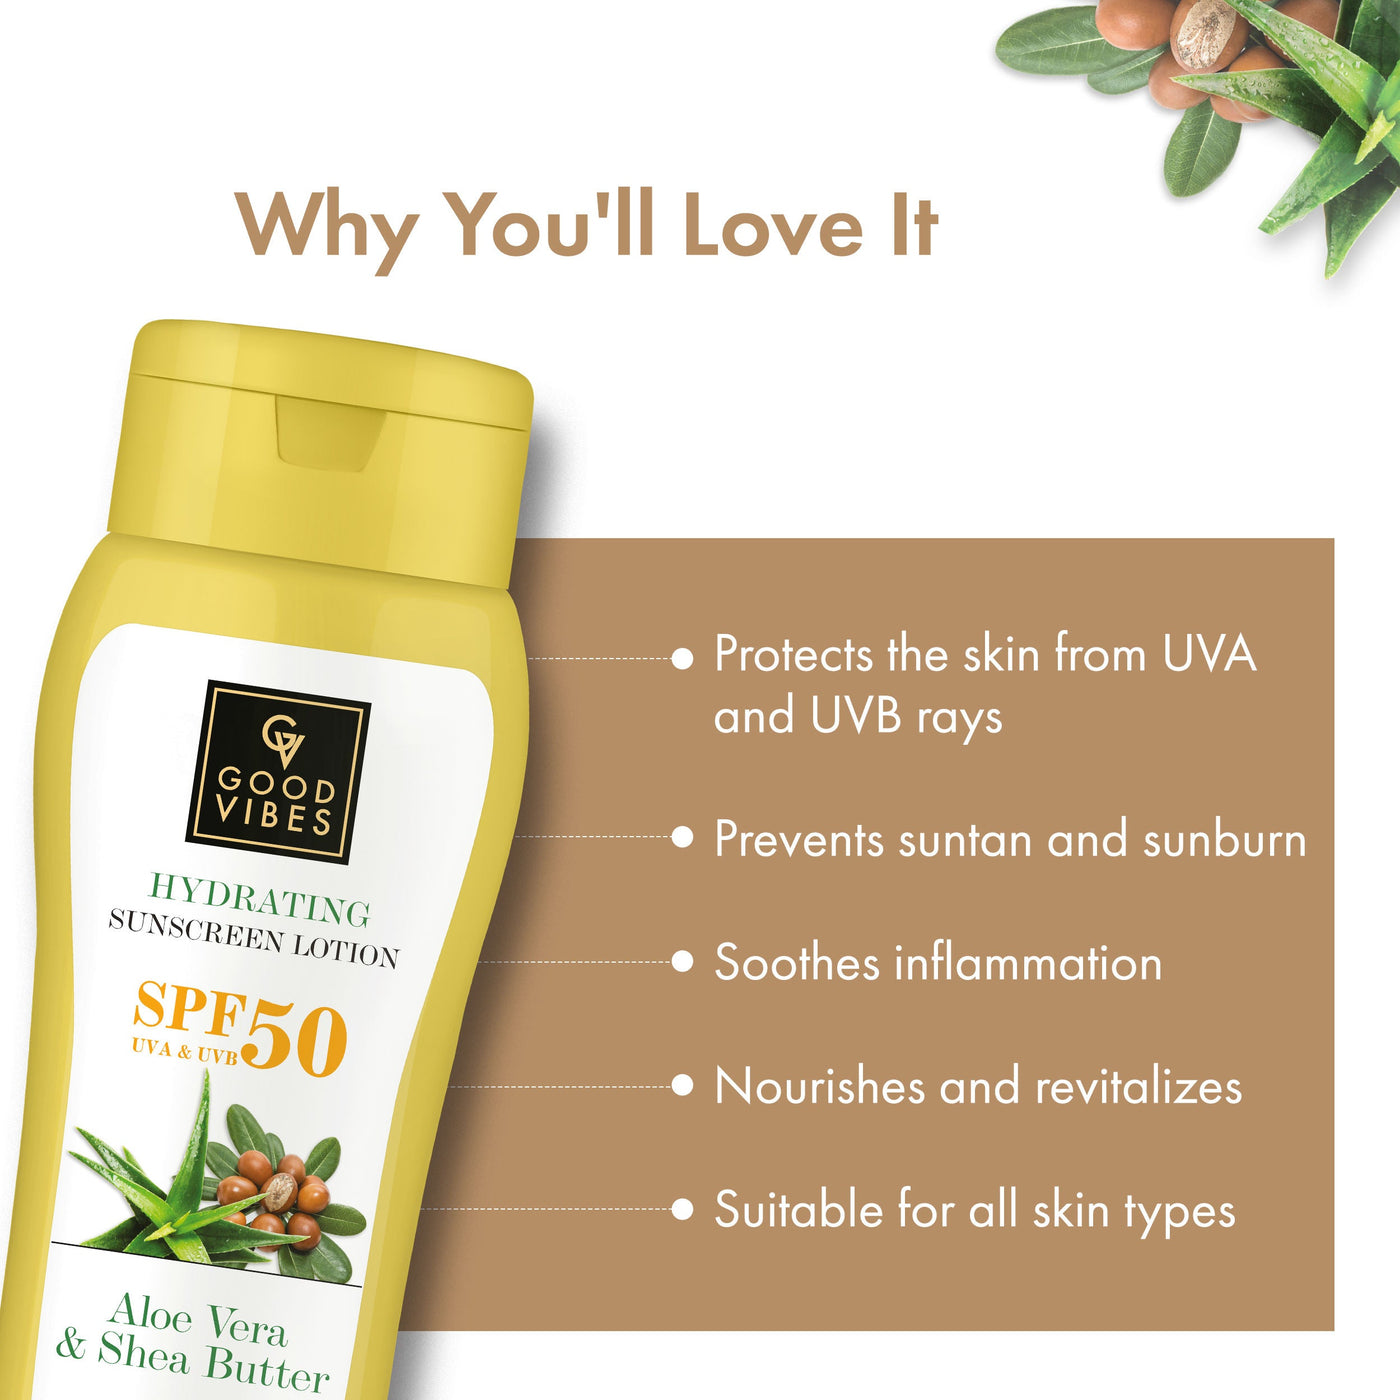 good-vibes-hydrating-sunscreen-lotion-spf-50-aloe-vera-and-shea-butter-110ml-4